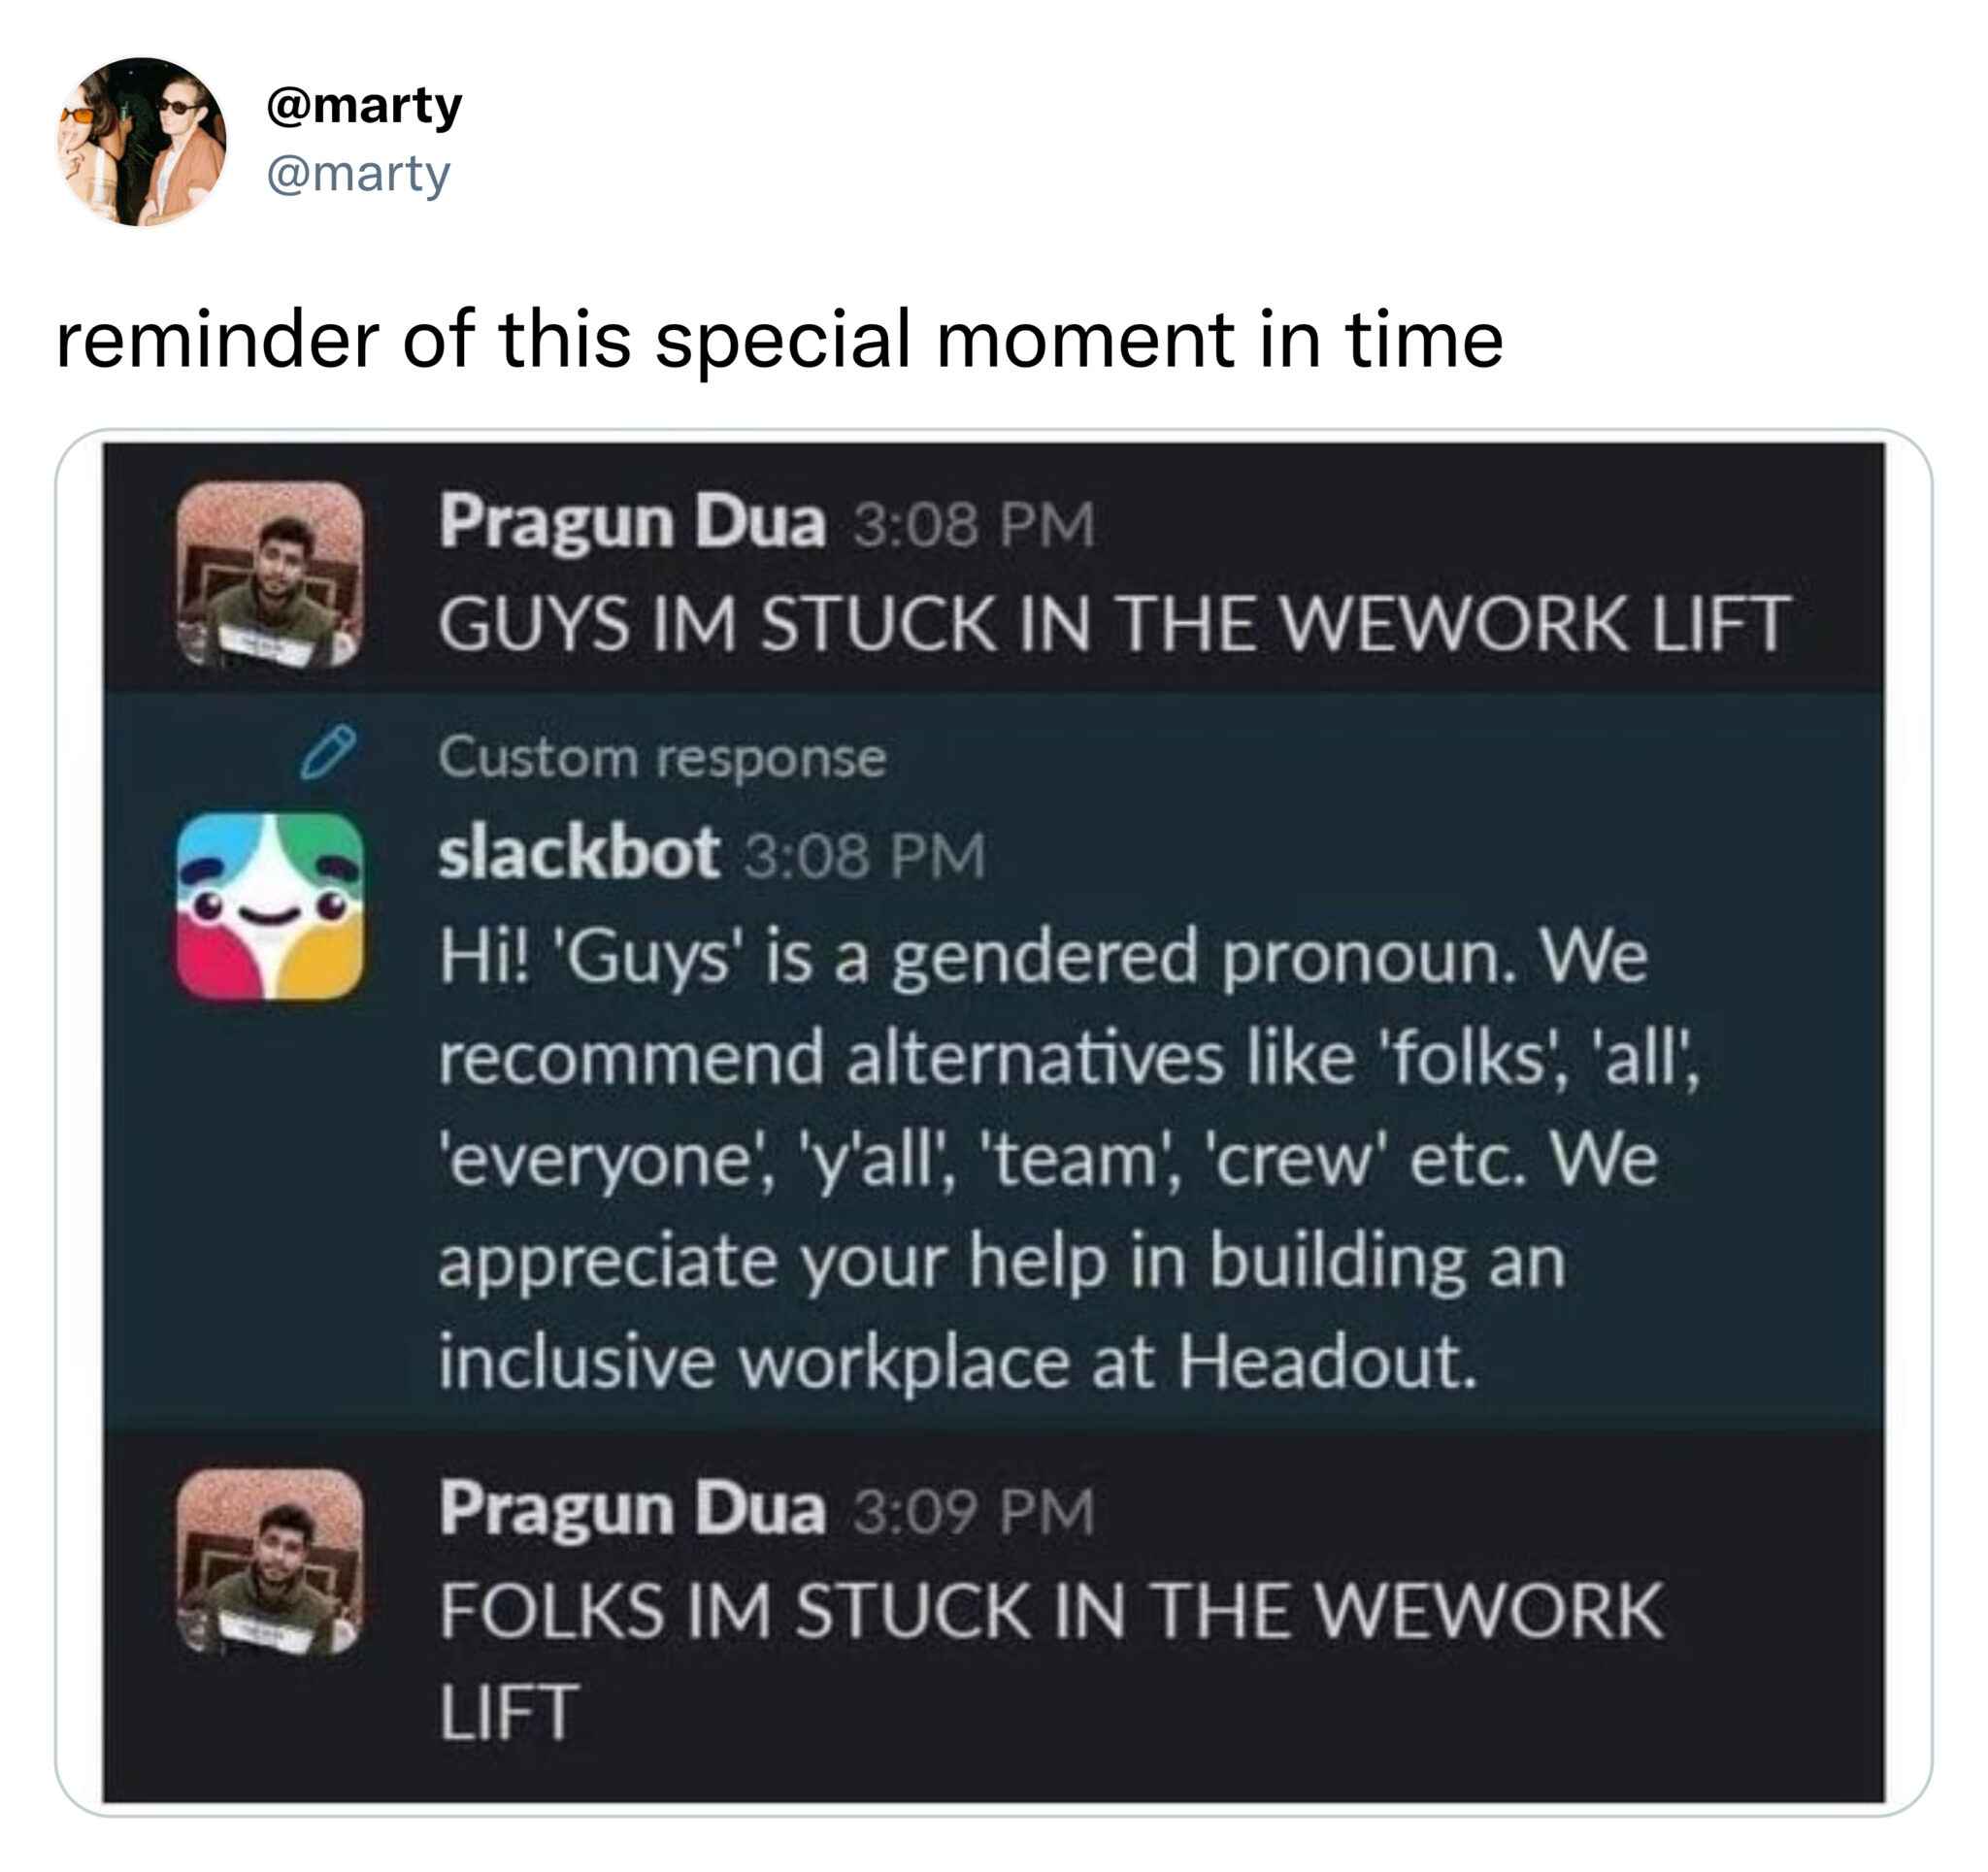 best of twitter - software - reminder of this special moment in time Pragun Dua Guys Im Stuck In The Wework Lift Custom response slackbot Hi! 'Guys' is a gendered pronoun. We recommend alternatives 'folks', 'all', 'everyone', 'y'all', 'team', 'crew' etc. 